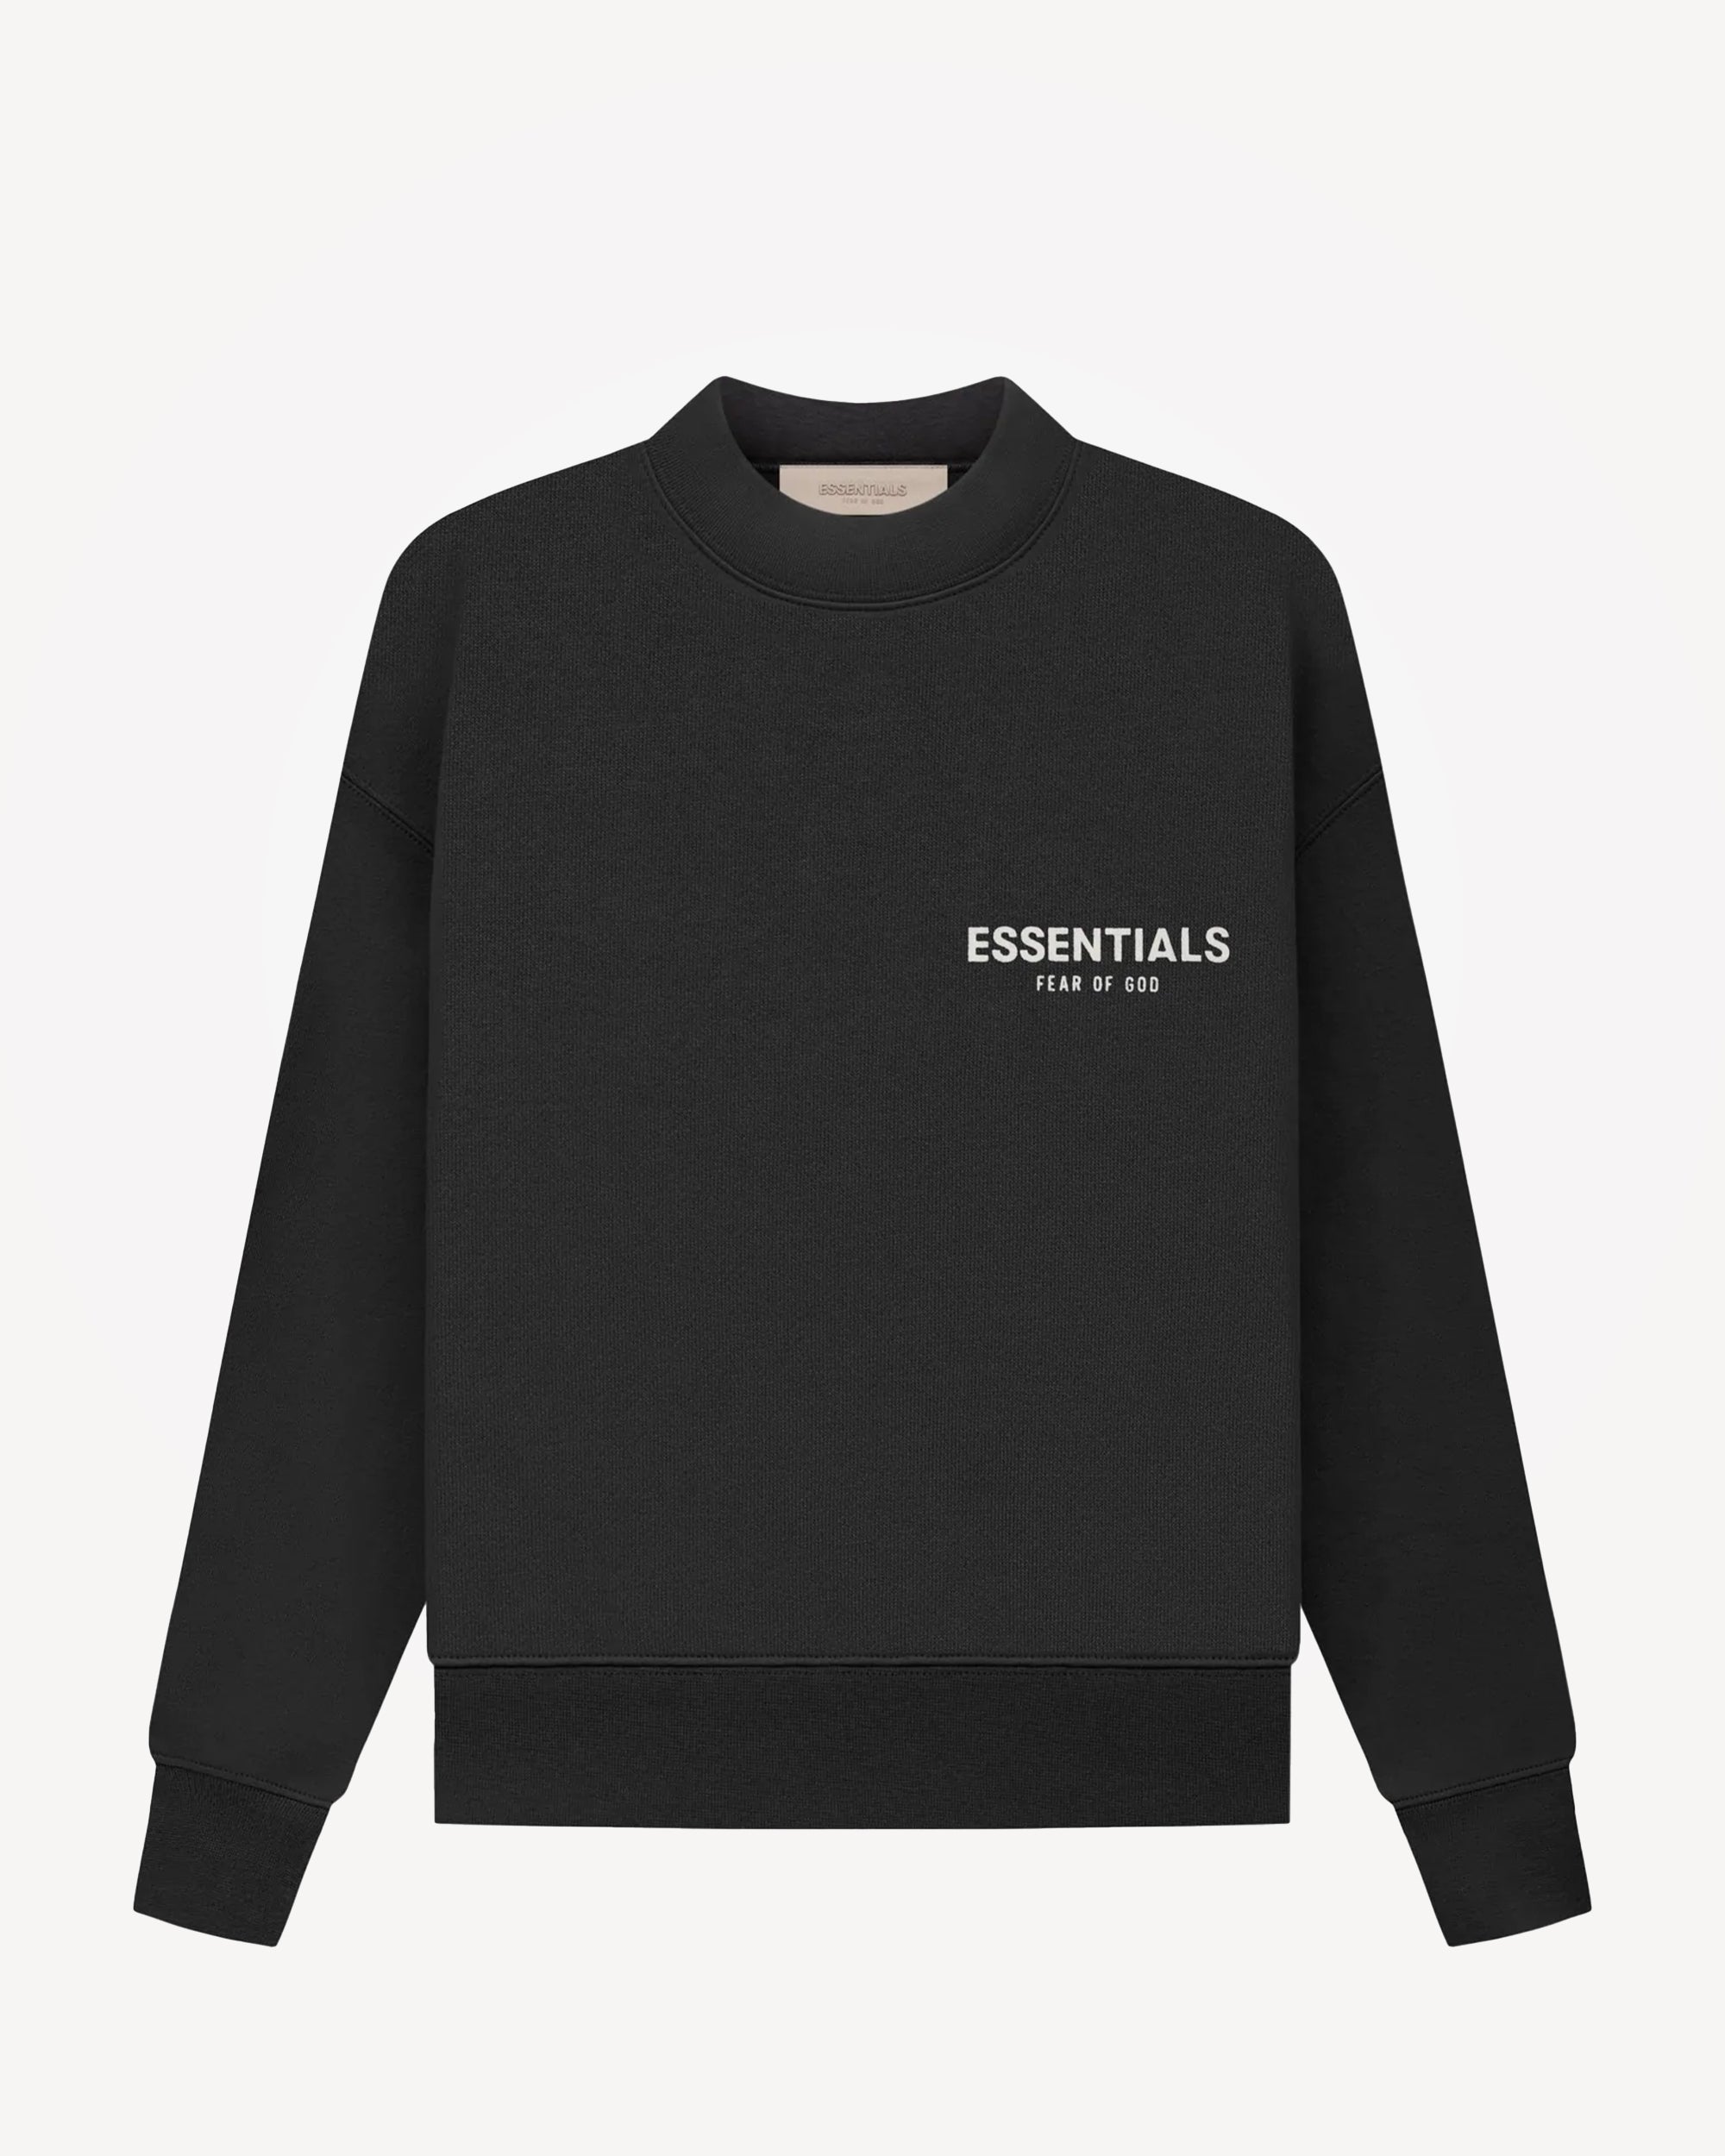 Kids' Core Collection Crewneck in Black